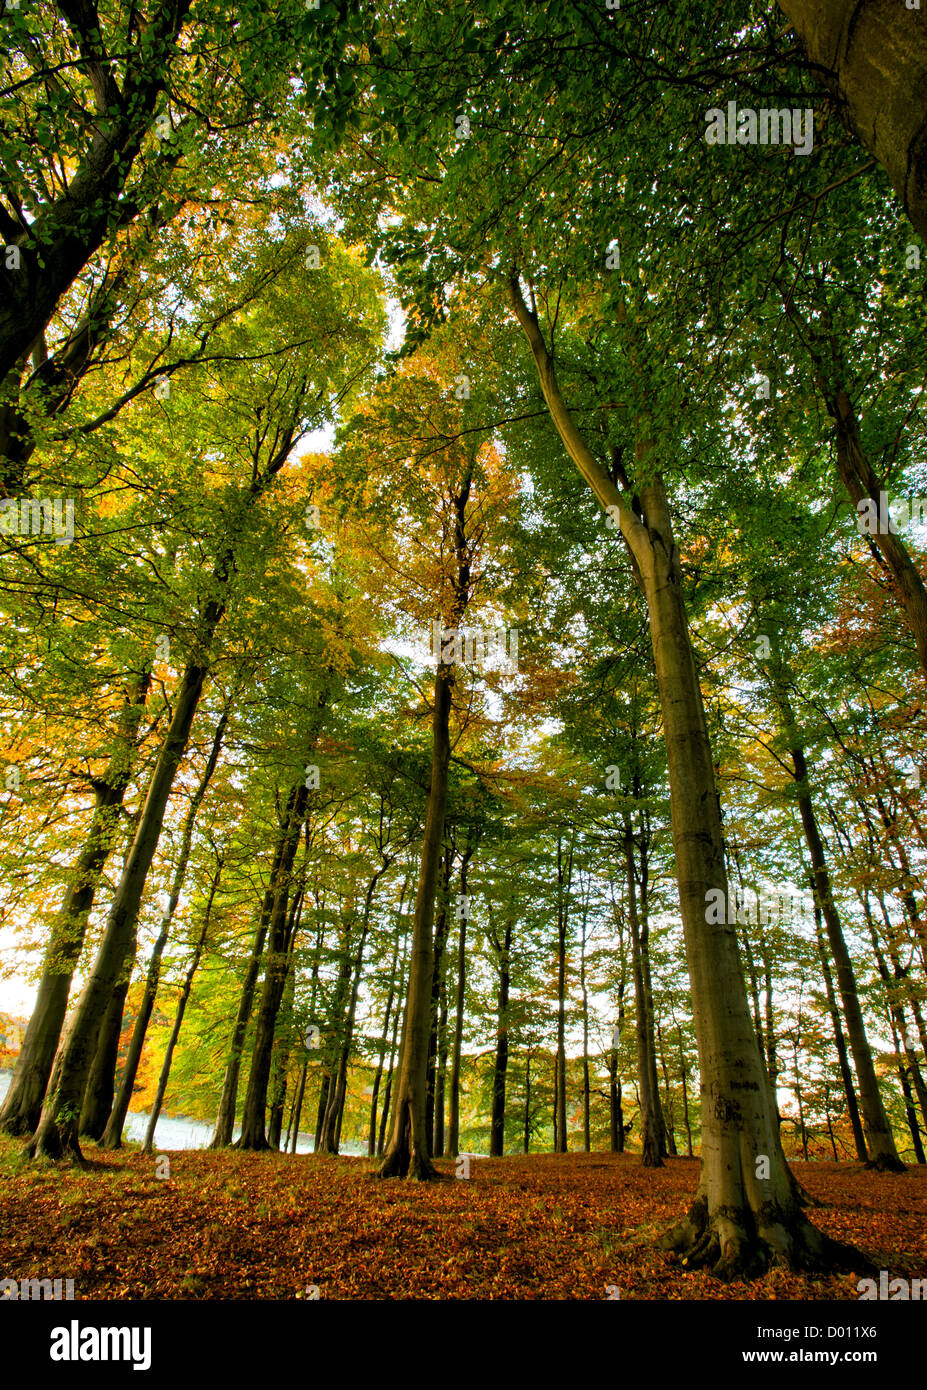 Wide angle portrait of autumn trees in Pollok Country Park, Glasgow, Scotland, UK Stock Photo